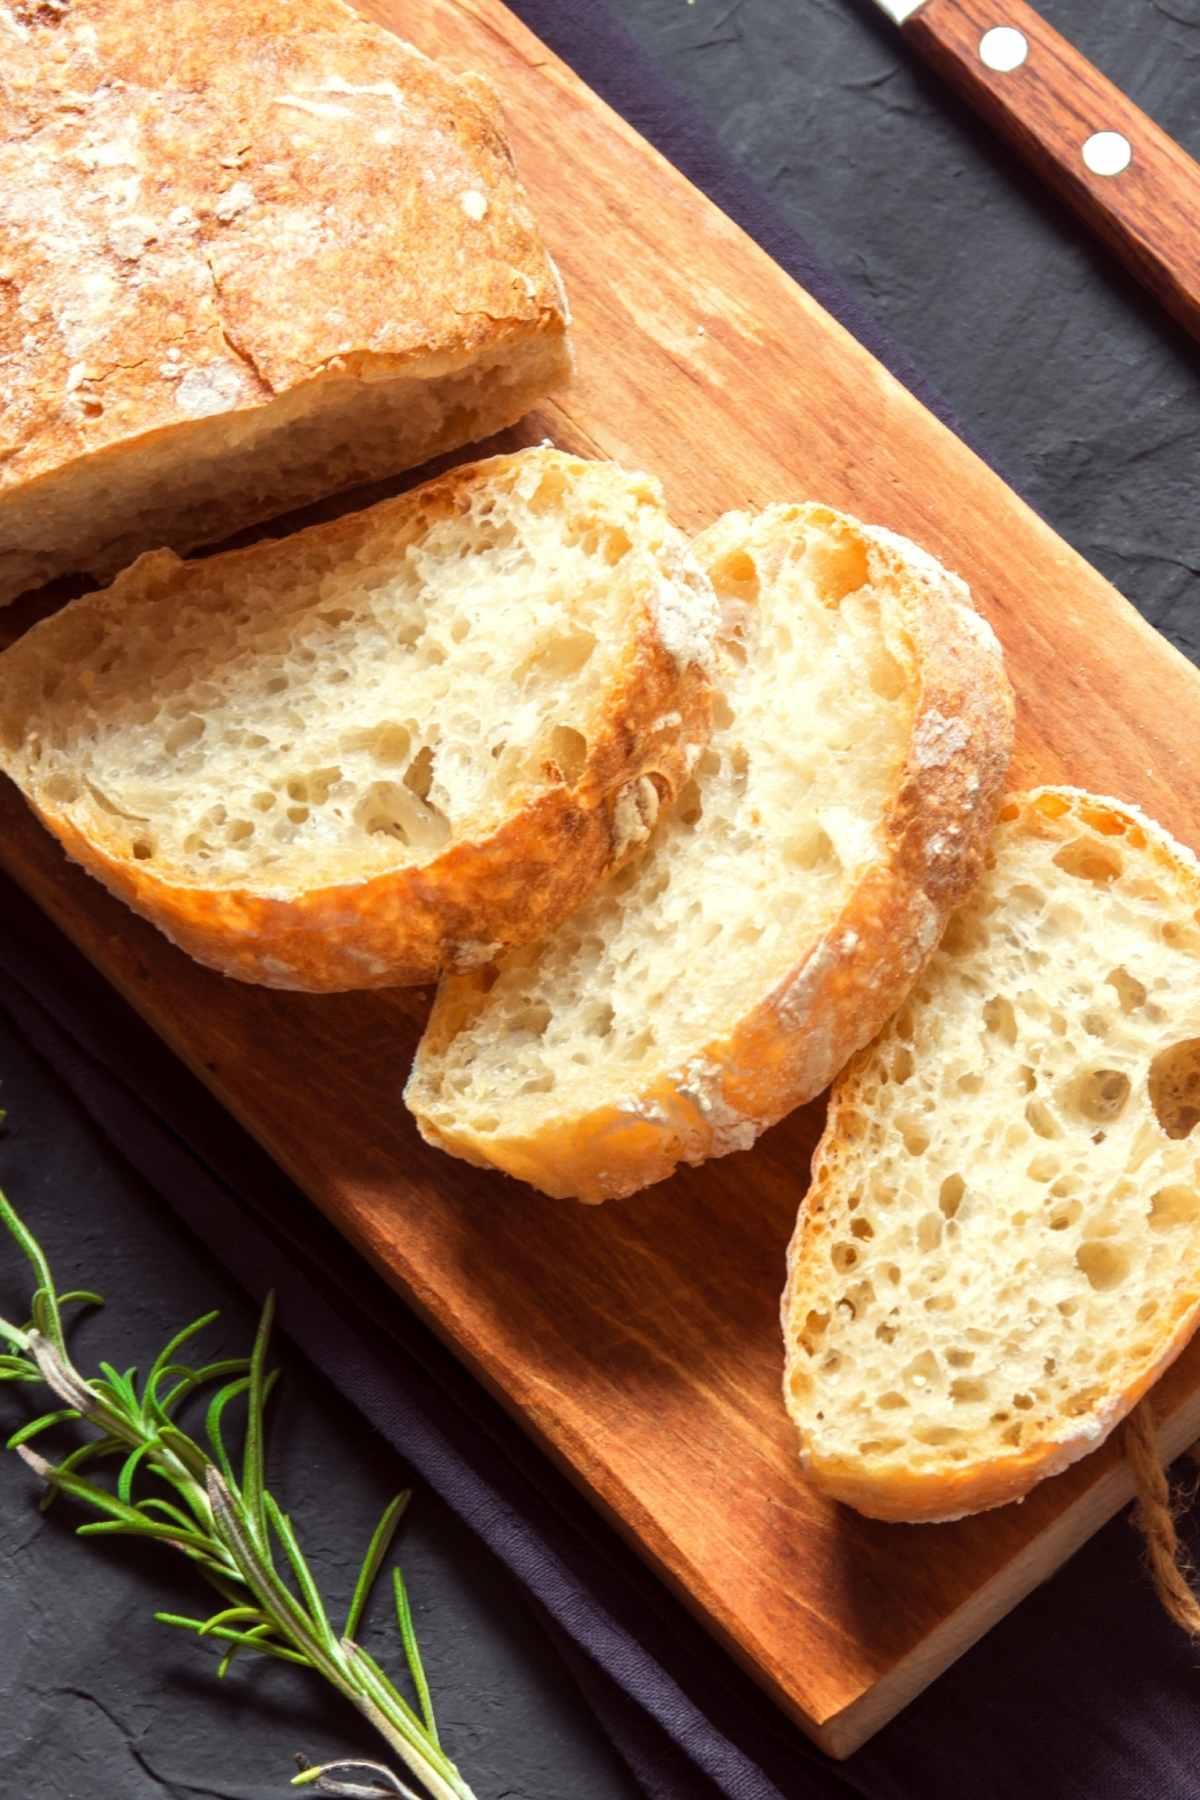 Here’s your chance to get started with bread making. This homemade Cuban Bread doesn’t require a mixer or any special pans, and uses a handful of basic ingredients.